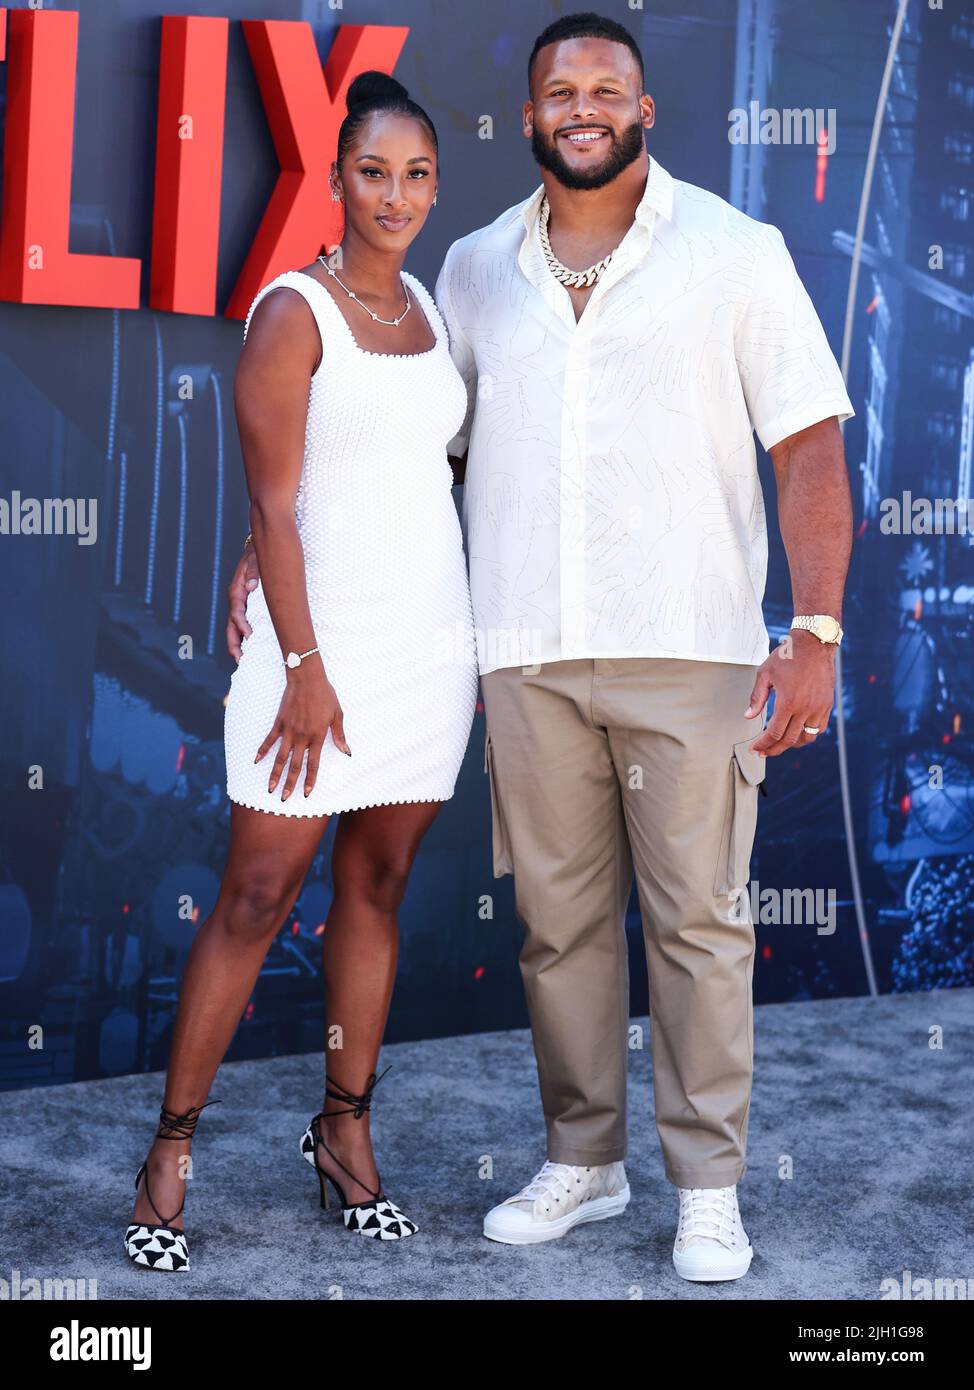 HOLLYWOOD, LOS ANGELES, CALIFORNIA, USA - JULY 13: Erica Donald and husband/American football defensive tackle player Aaron Donald arrive at the World Premiere Of Netflix's 'The Gray Man' held at the TCL Chinese Theatre IMAX on July 13, 2022 in Hollywood, Los Angeles, California, United States. (Photo by Xavier Collin/Image Press Agency) Stock Photo